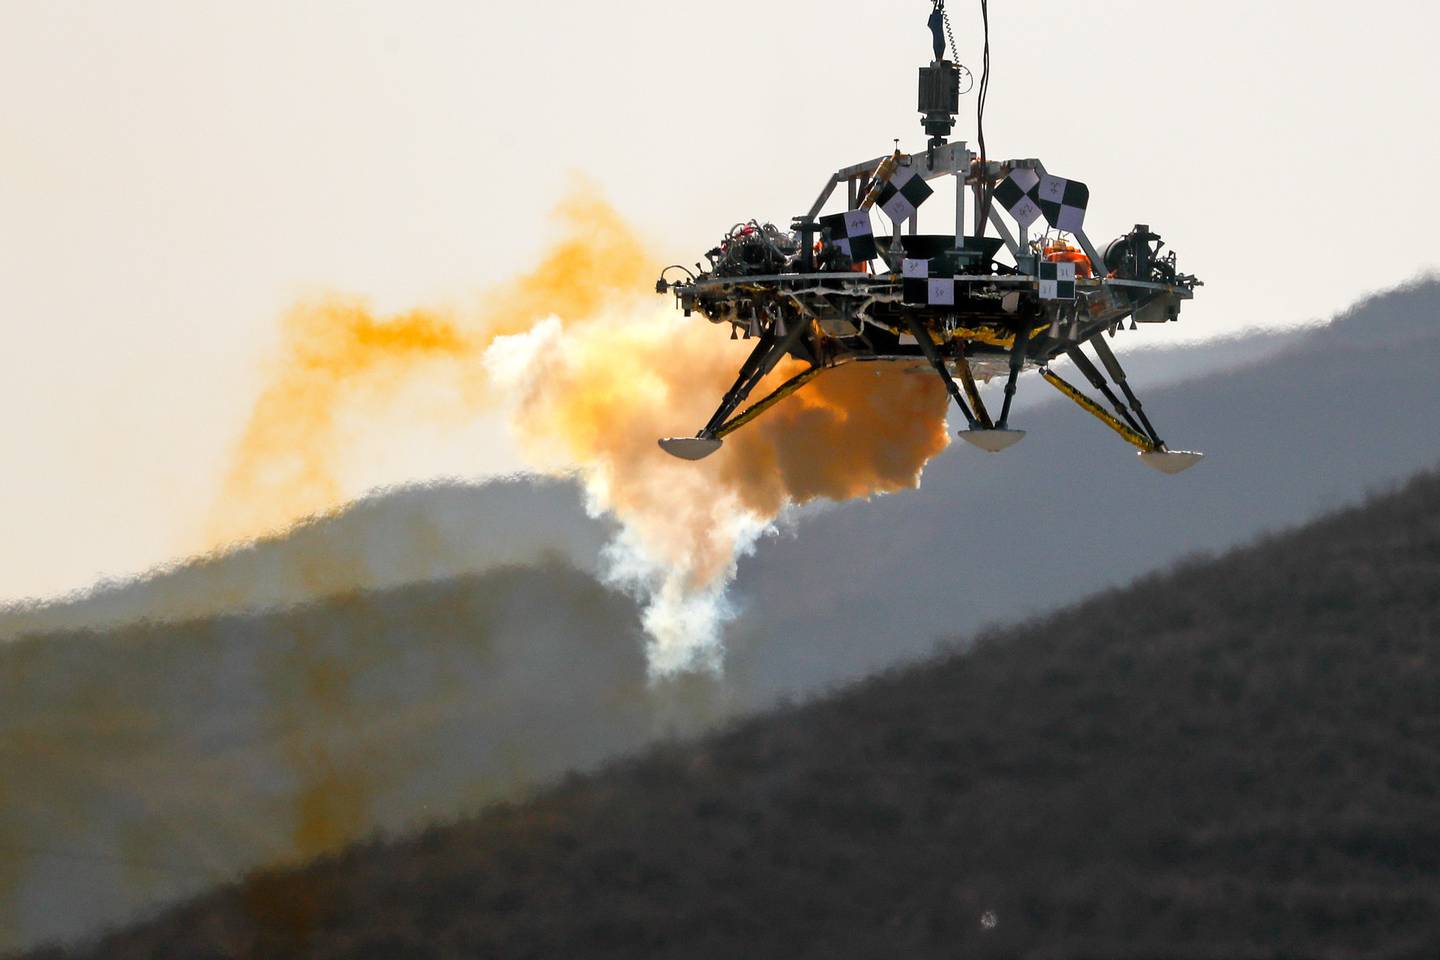 A lander is lifted during a test of hovering, obstacle avoidance and deceleration capabilities of a Mars lander in mid November 2019 at a facility in Huailai in China's Hebei province. Photo / AP